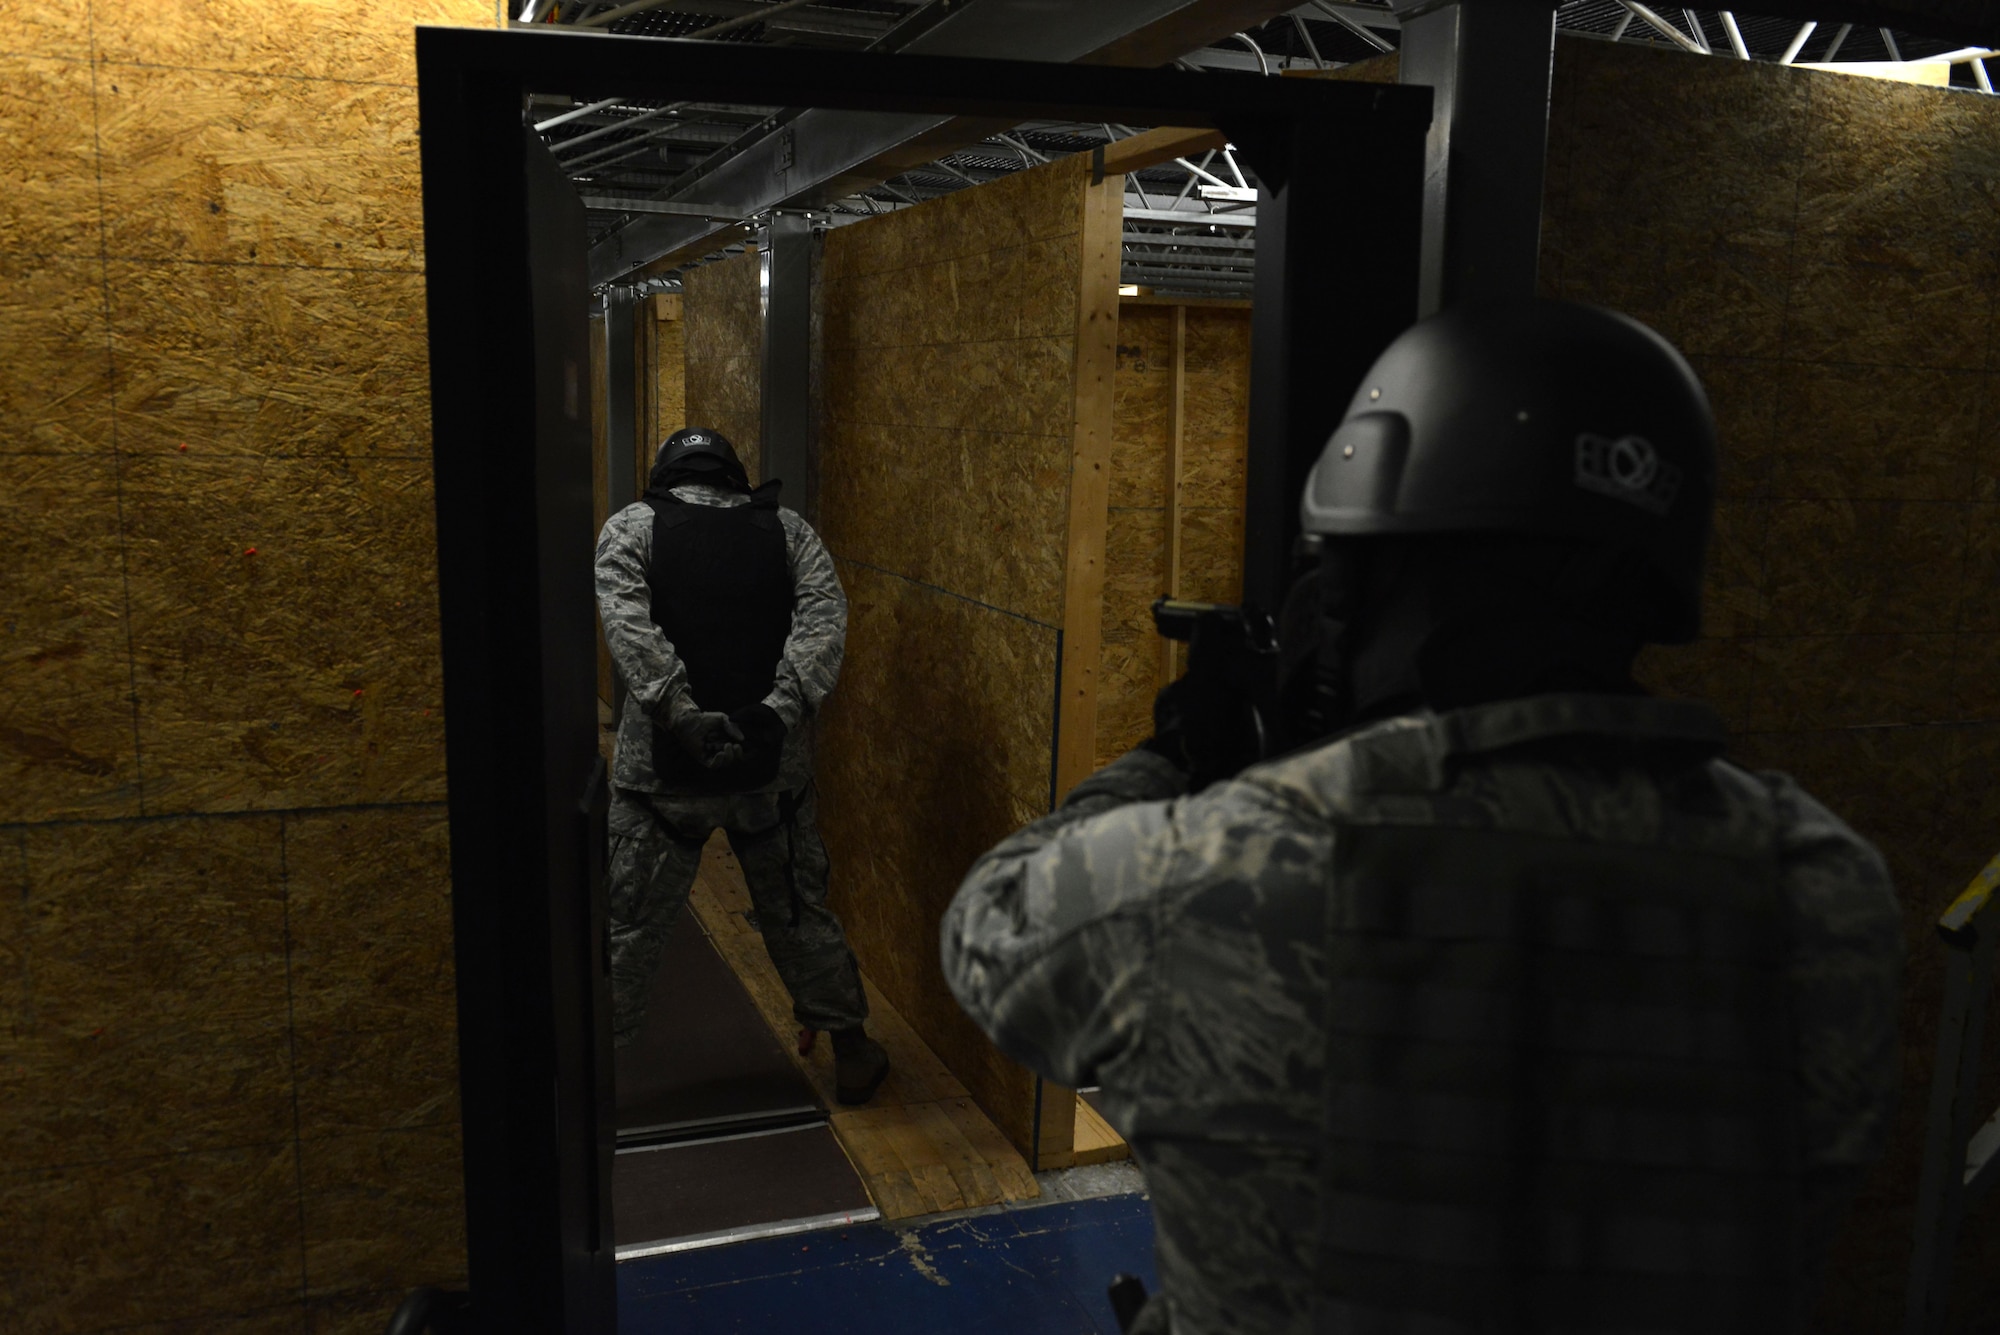 A U.S. Airman gives orders to a simulated attacker at Shaw Air Force Base, S.C., Jan. 18, 2017. After receiving their annual use of force training, 20th Security Forces Squadron Airmen used their training to resolve three different scenarios with varying levels of threat. (U.S. Air Force photo by Airman 1st Class Destinee Sweeney)